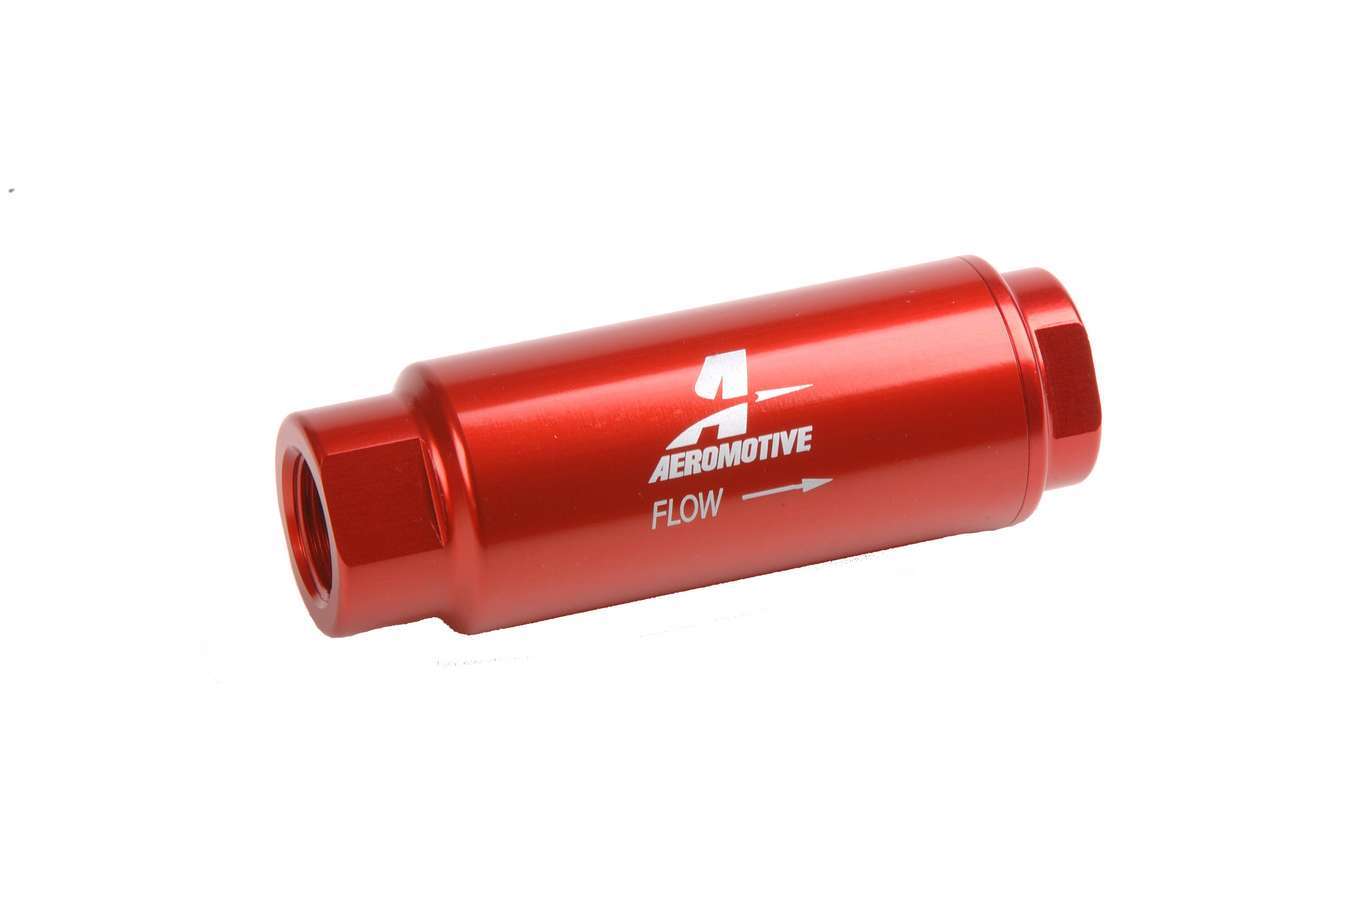 Aeromotive 12316 Fuel Filter, SS Series, In-Line, 100 Micron, Stainless Element, 3/8 in NPT Female Inlet, 3/8 in NPT Female Outlet, Aluminum, Red Anodized, Each